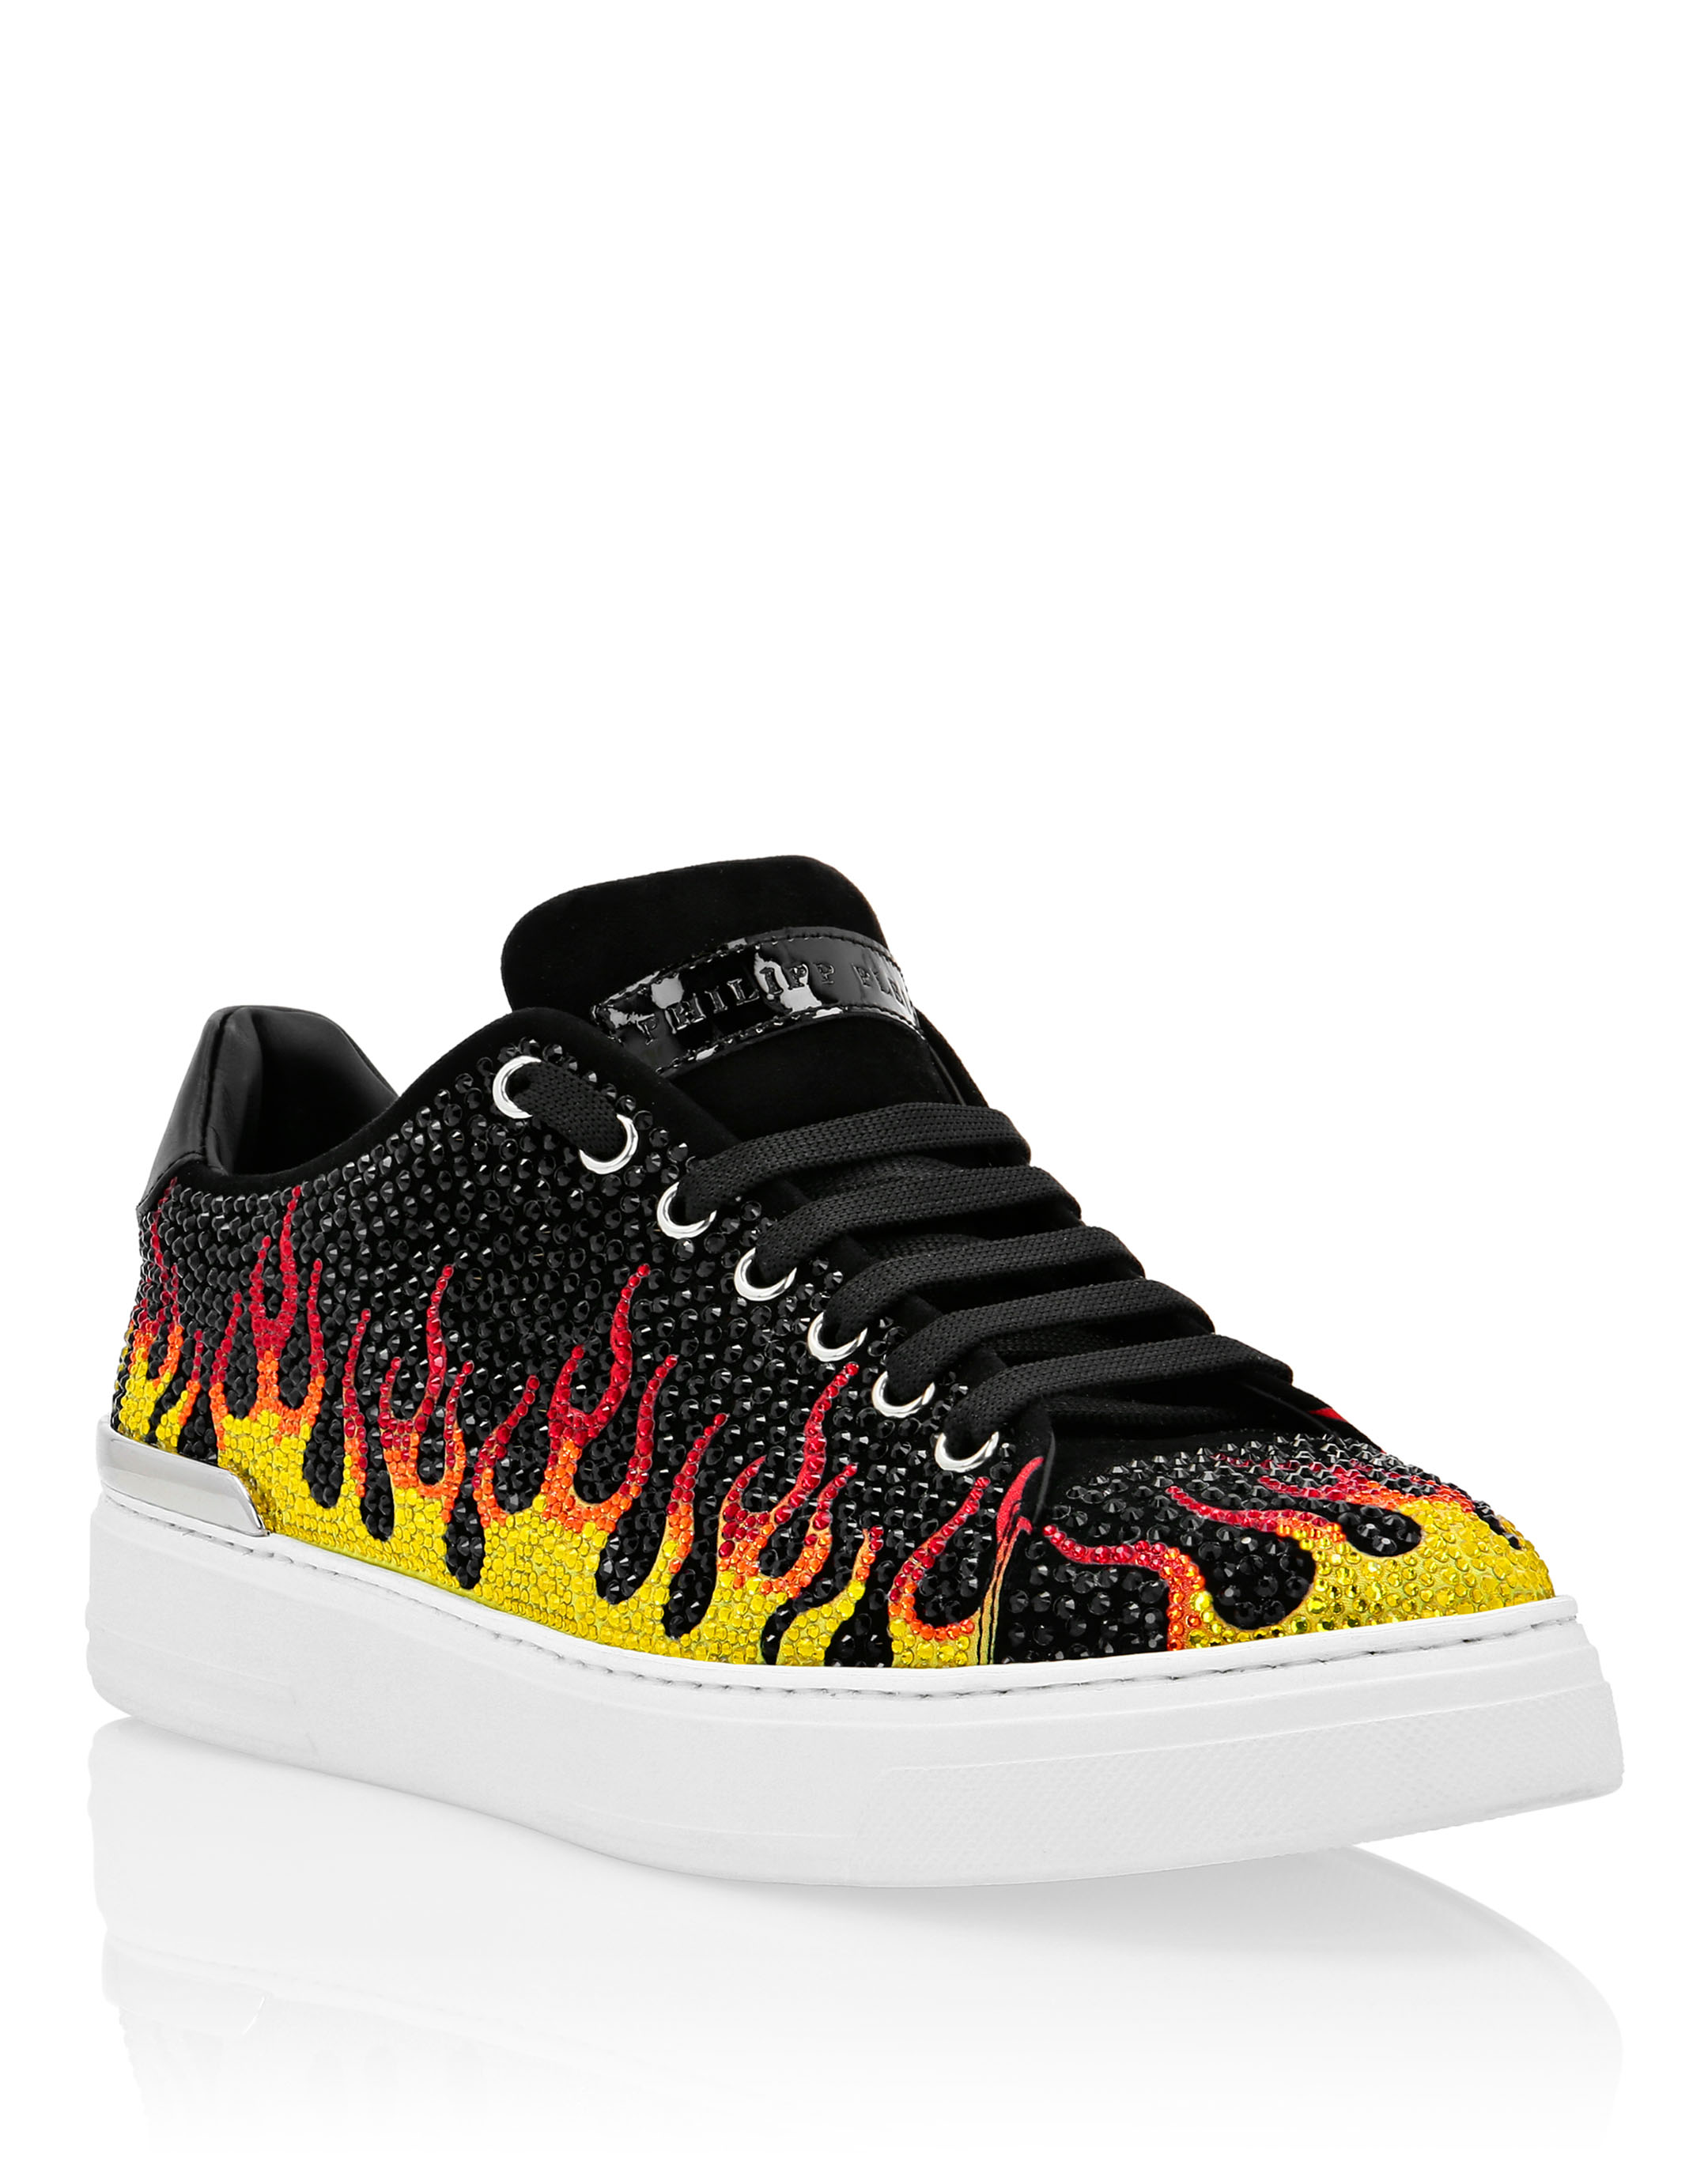 Lo-Top Sneakers crystal Flame | Philipp Plein Outlet